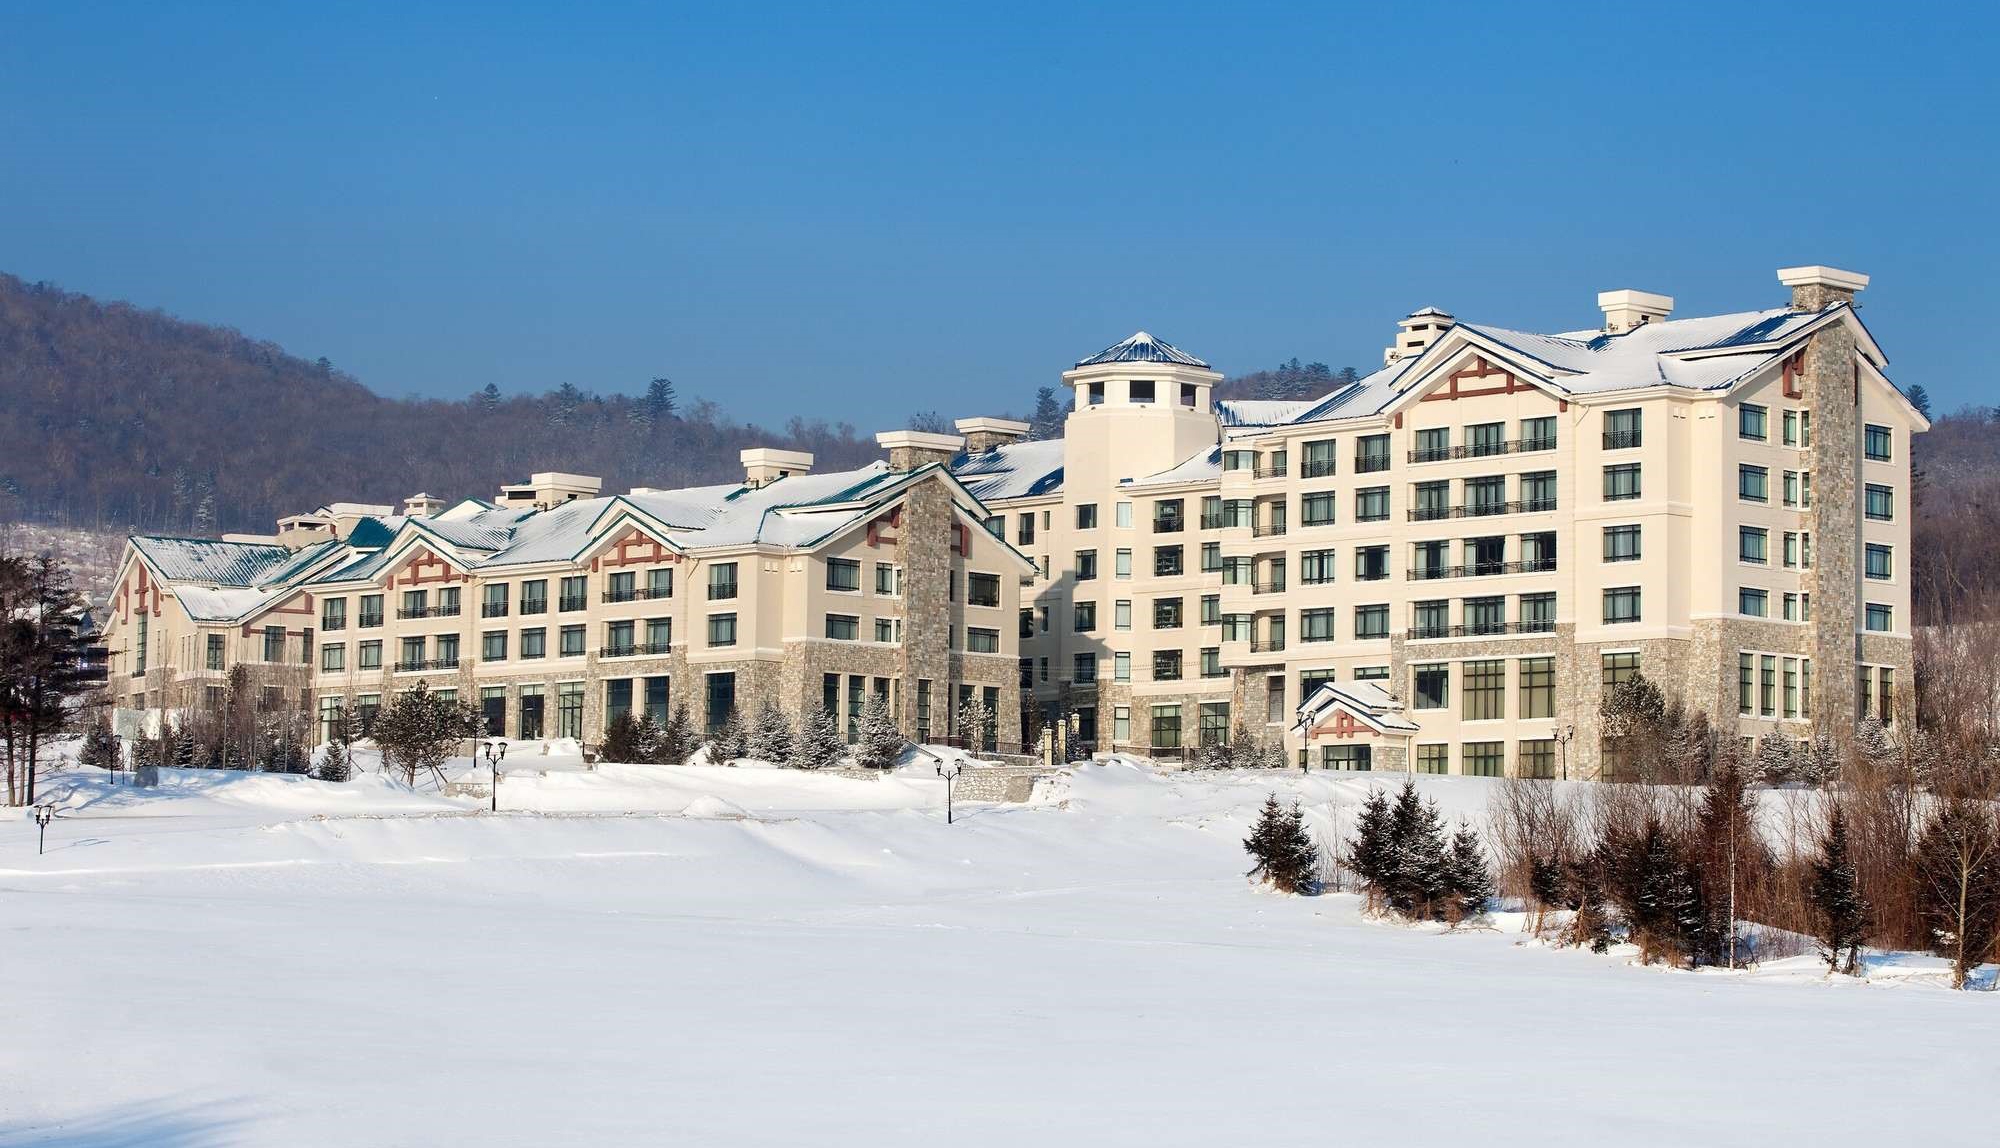 Photo: Club Med’s Yabuli Resort set in China’s first and largest ski region